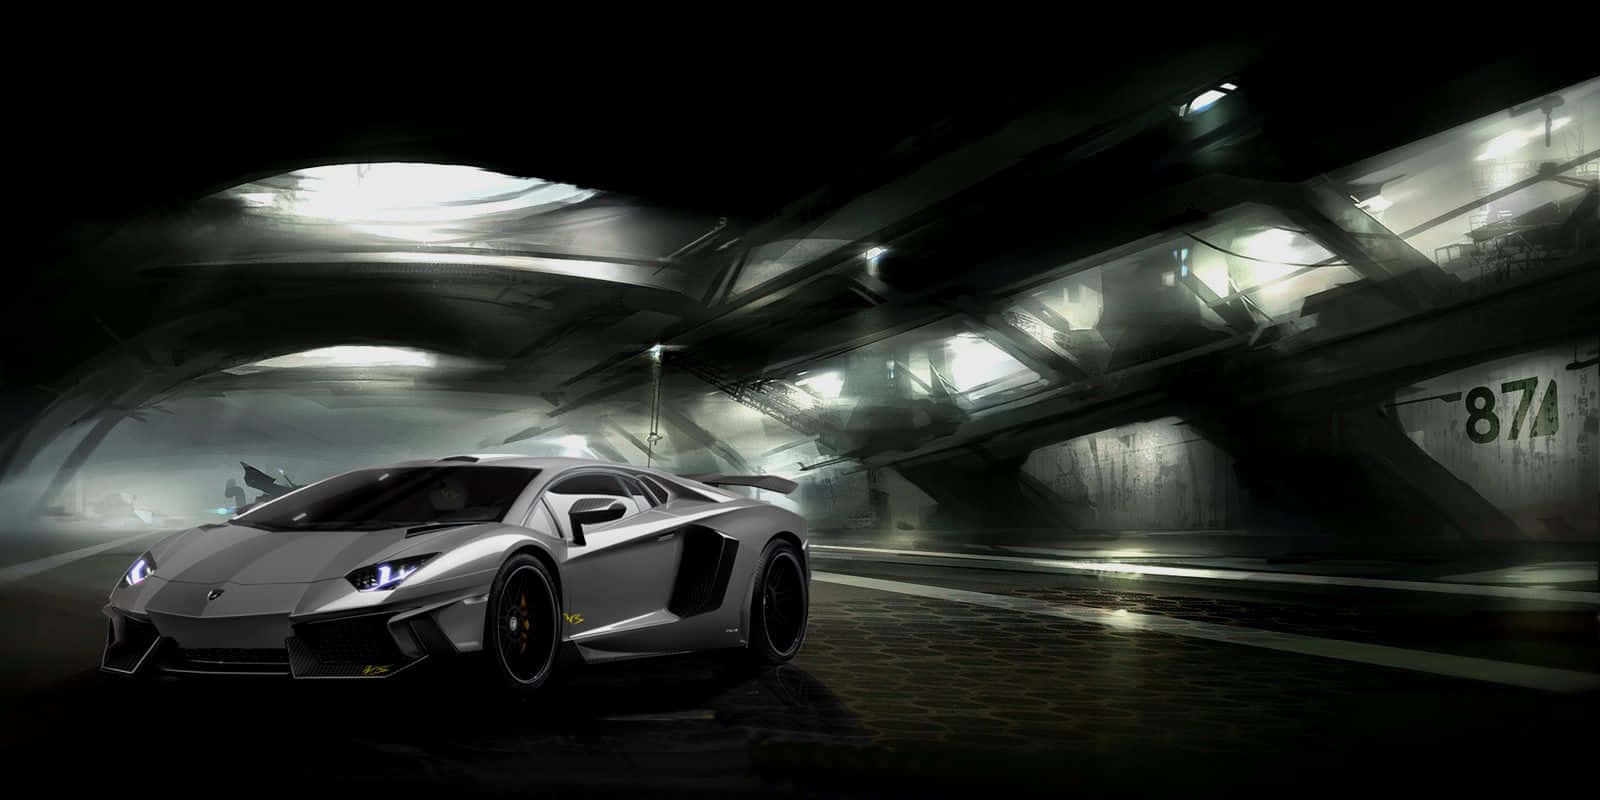 Speed and Style - The Cool Lamborghini Wallpaper